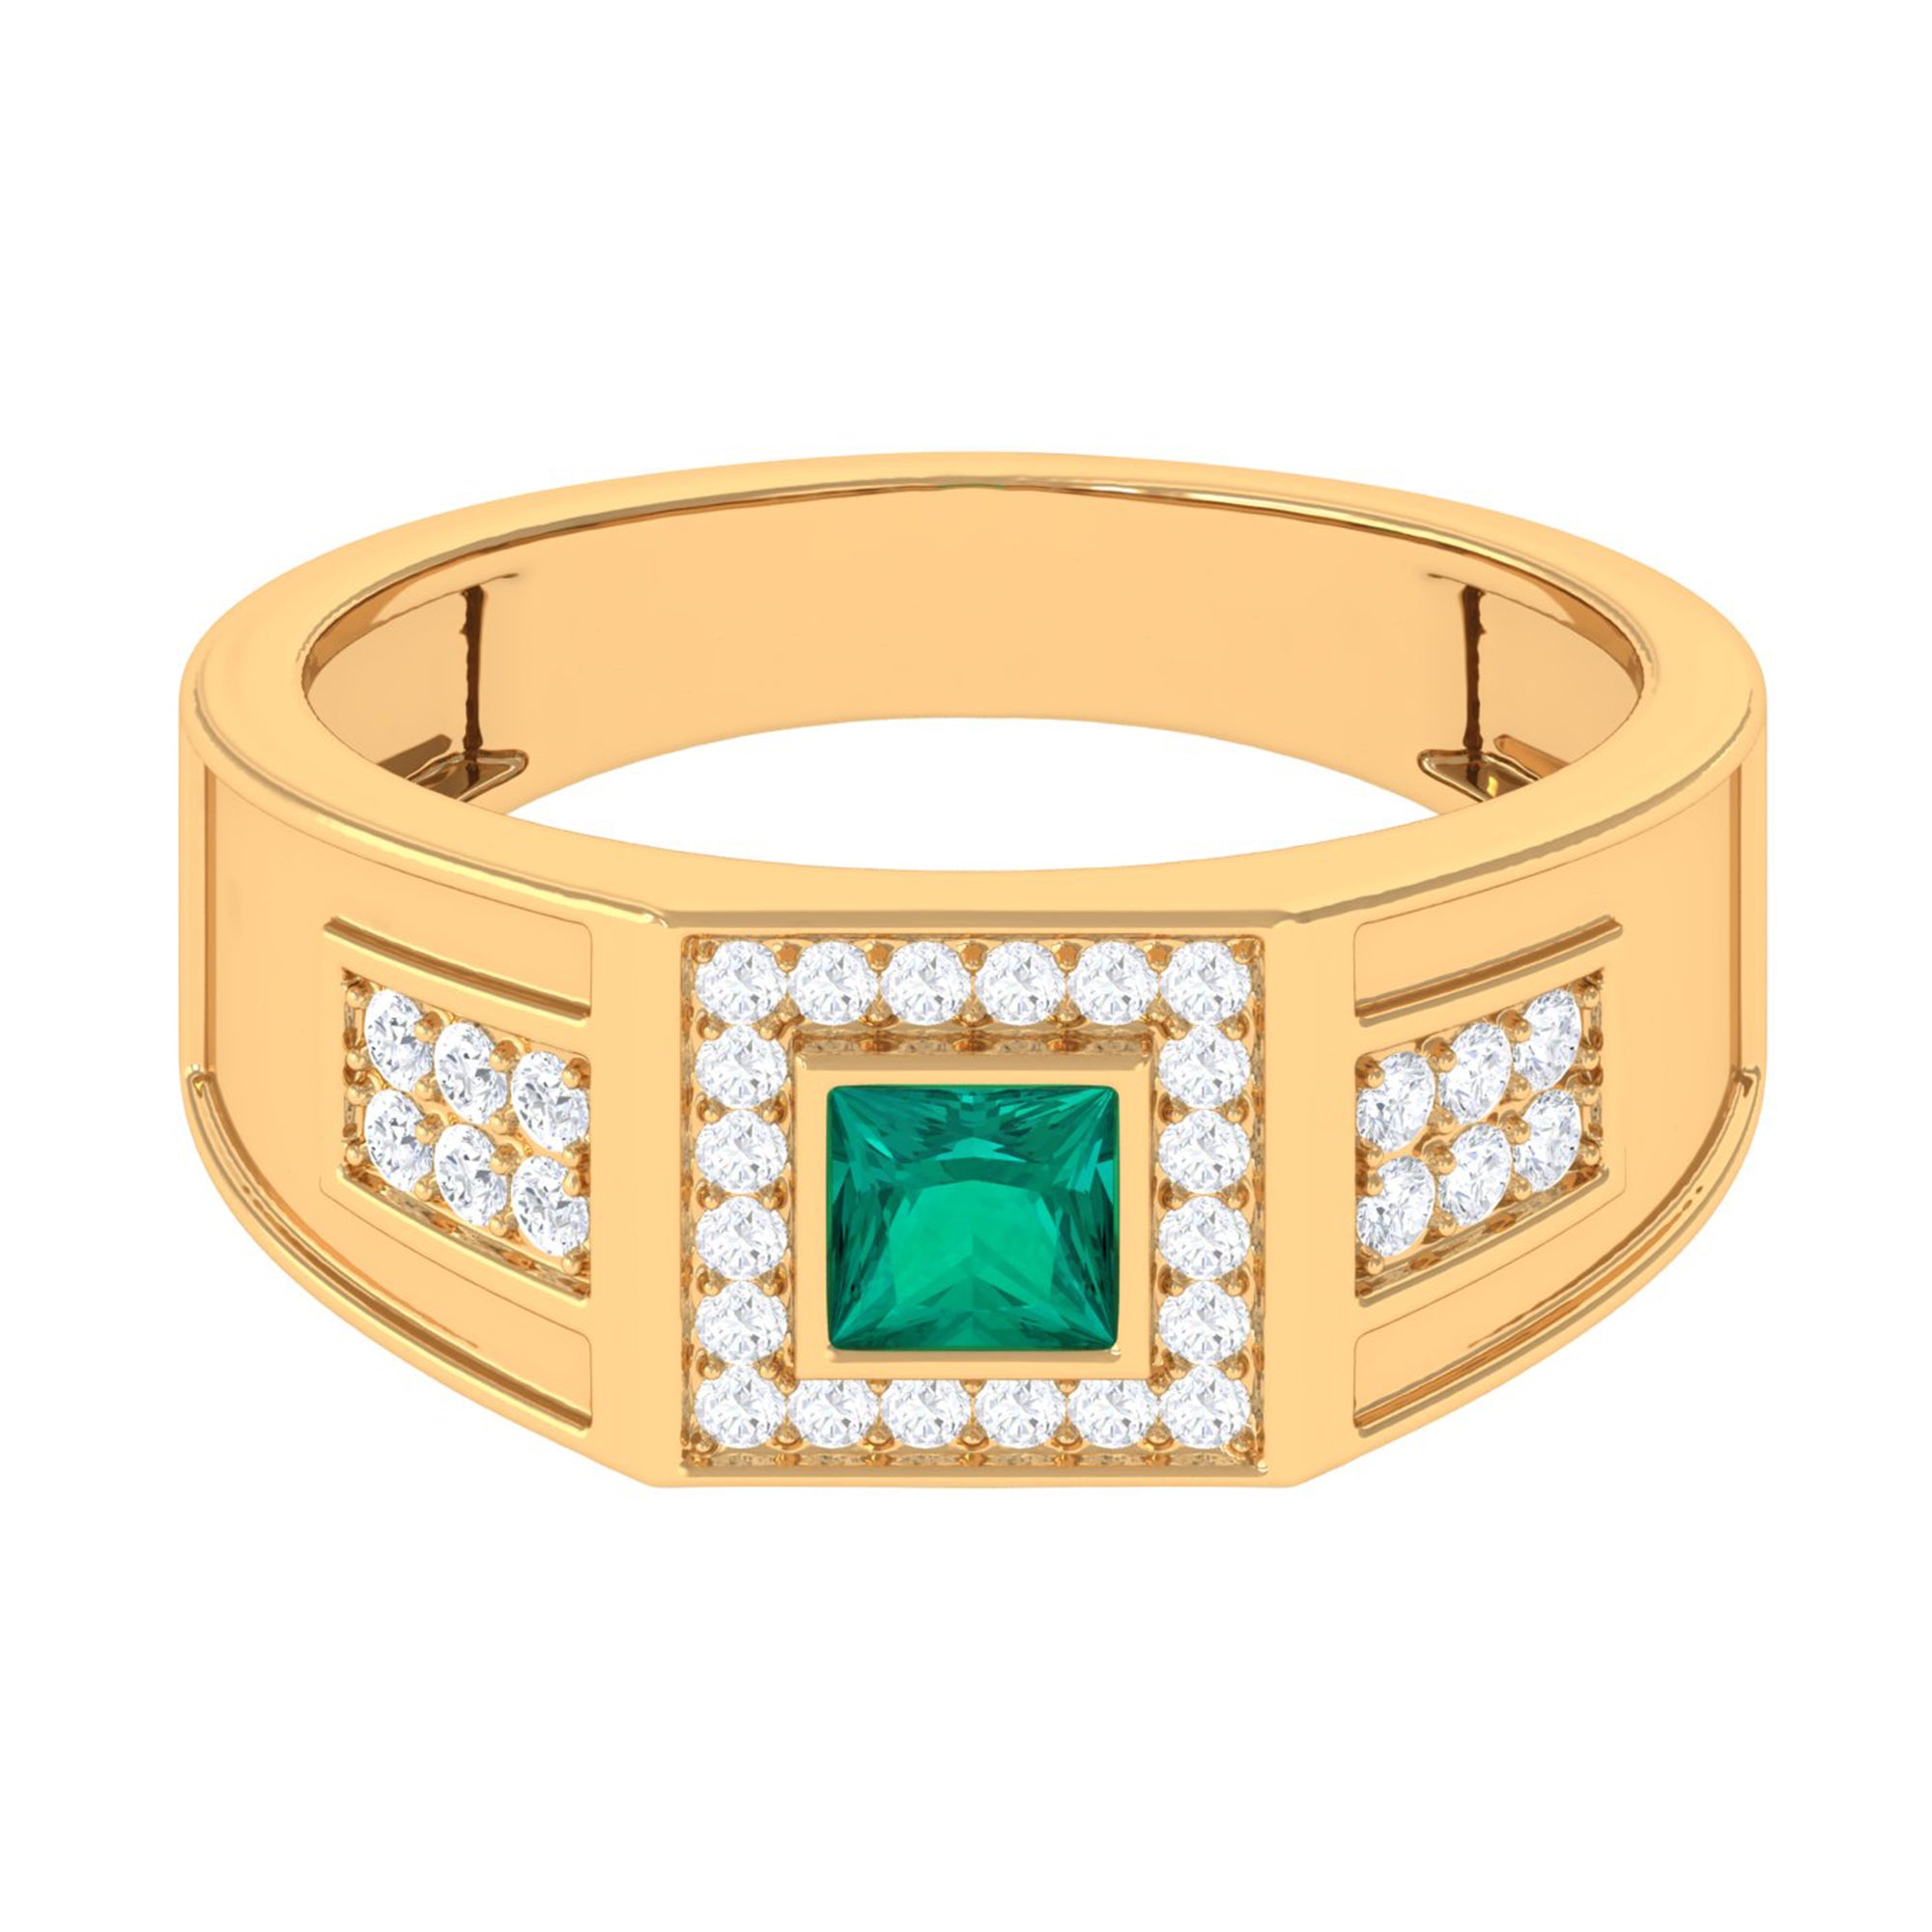 Princess Cut Emerald and Diamond Statement Engagement Ring Natural Emerald-AAA Quality - Virica Jewels